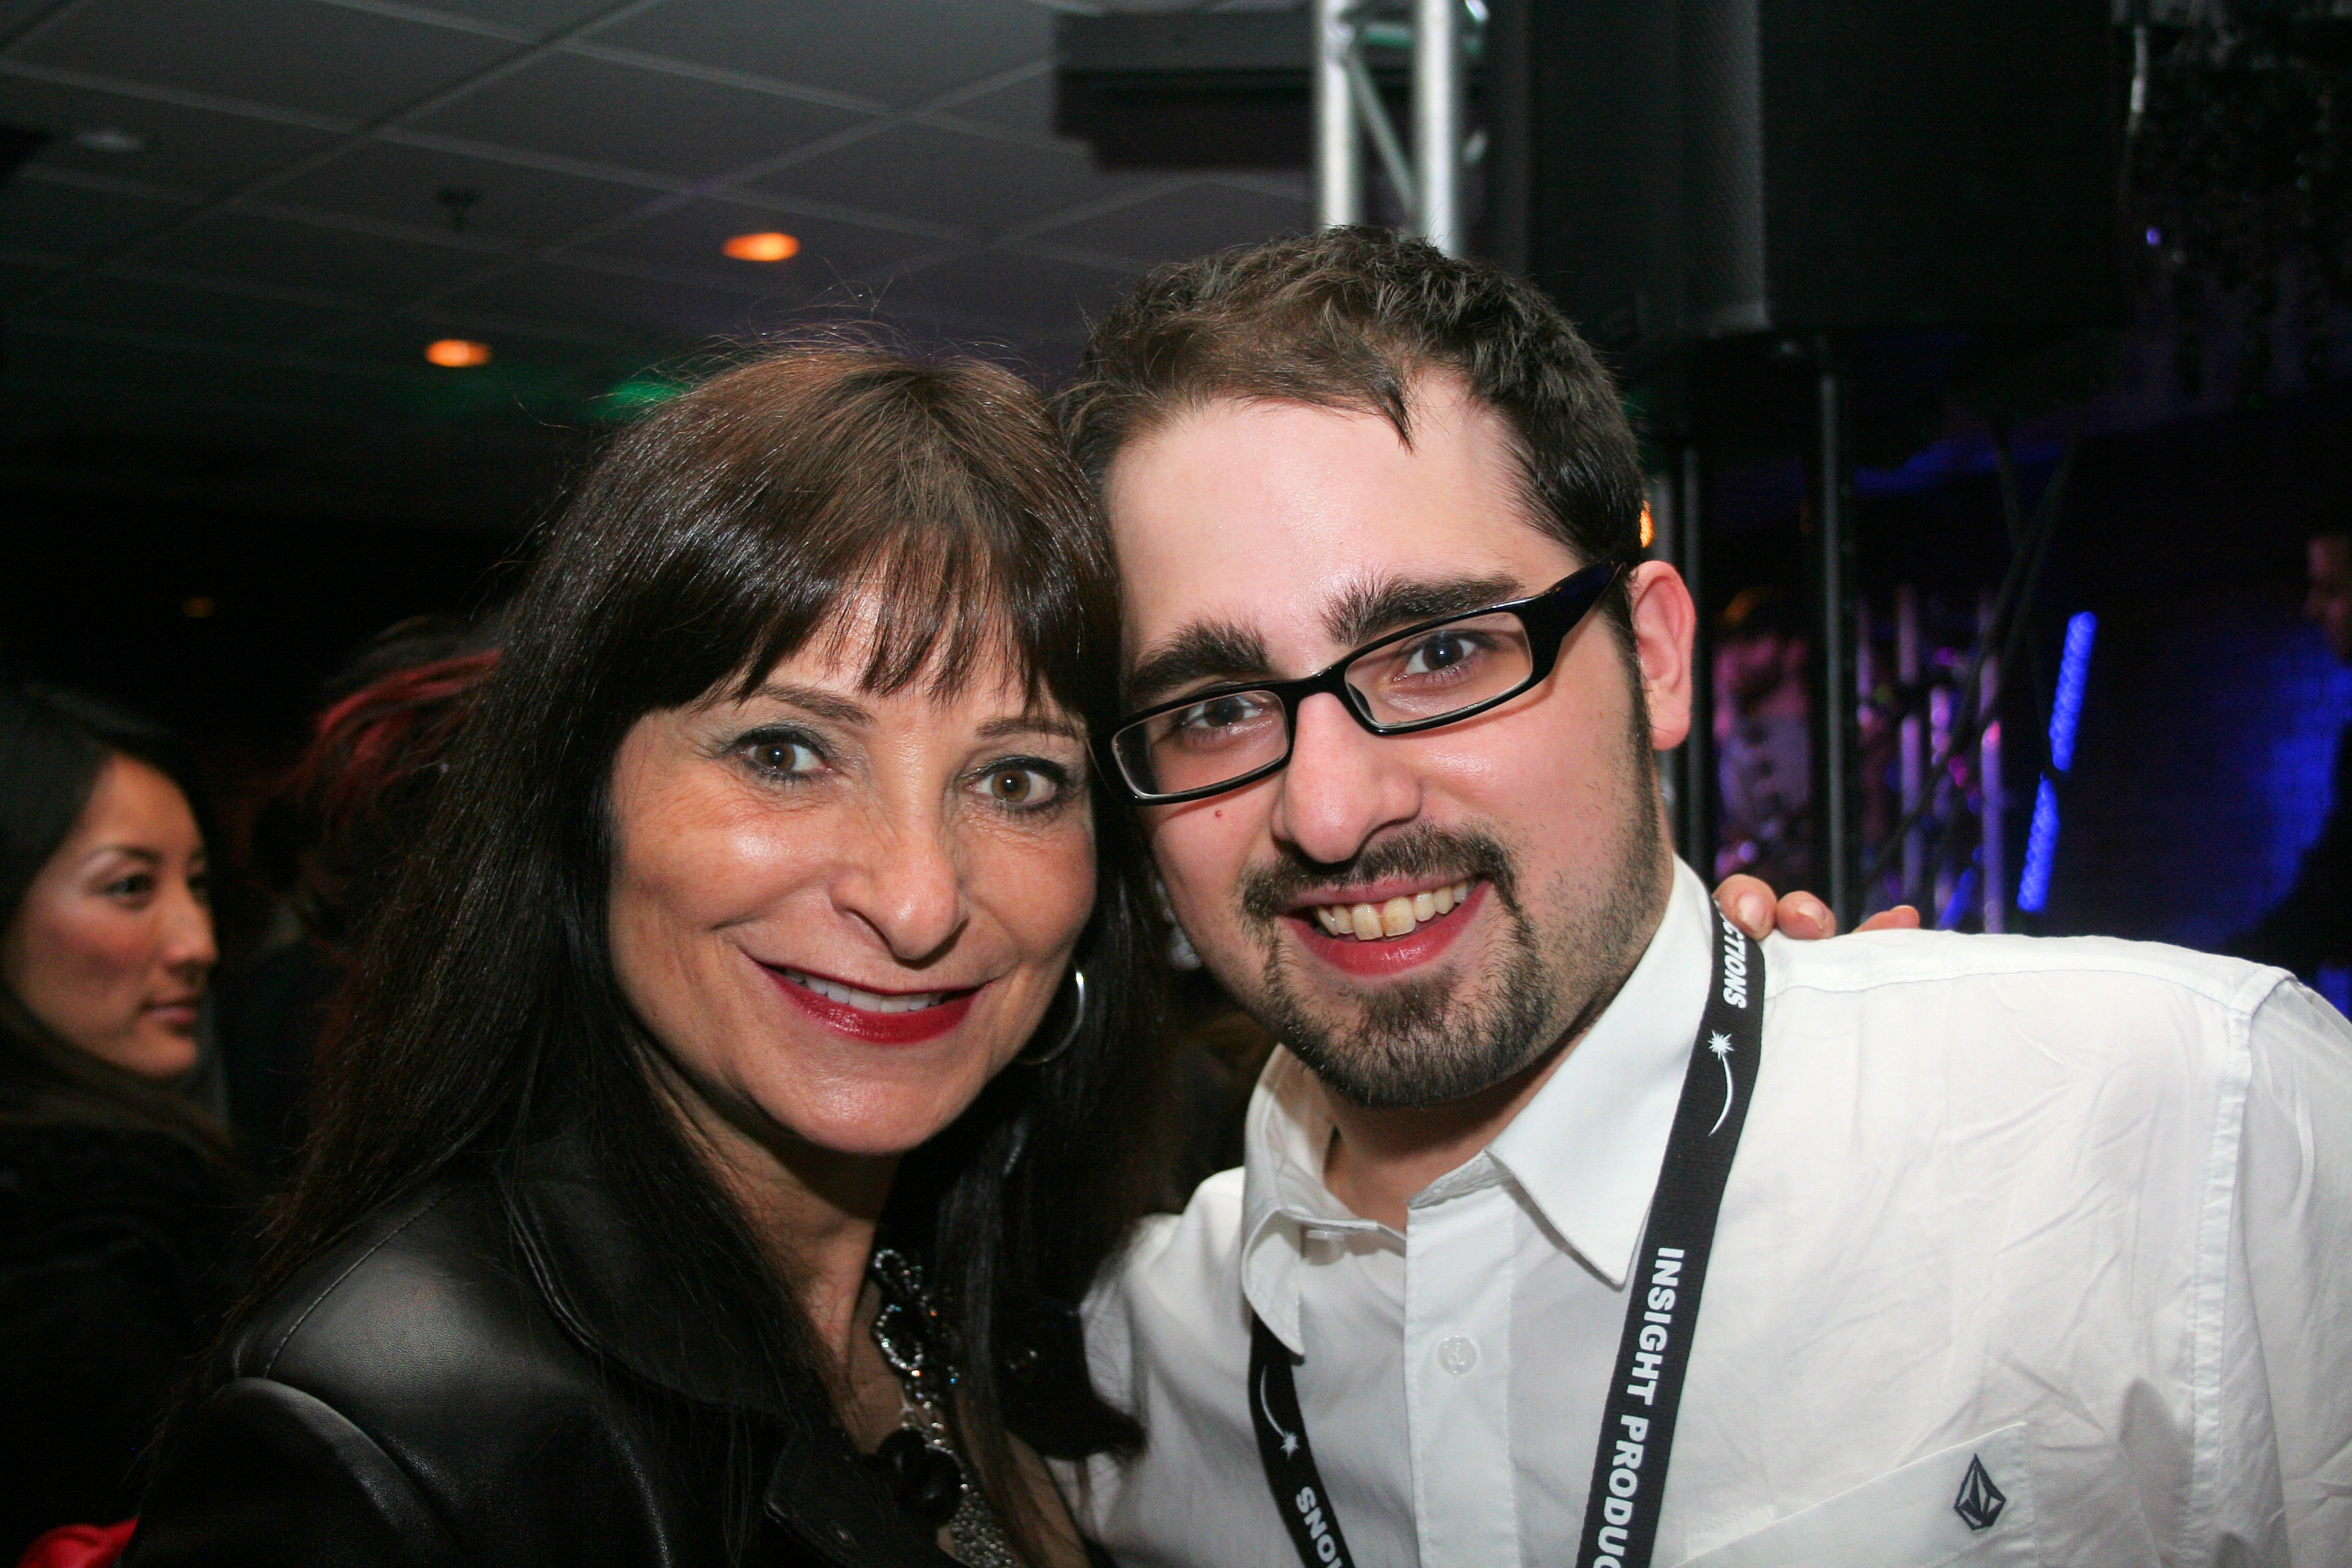 Joshua Jamieson with Jeanne Beker at the 2010 Junos Warner Music After Party.